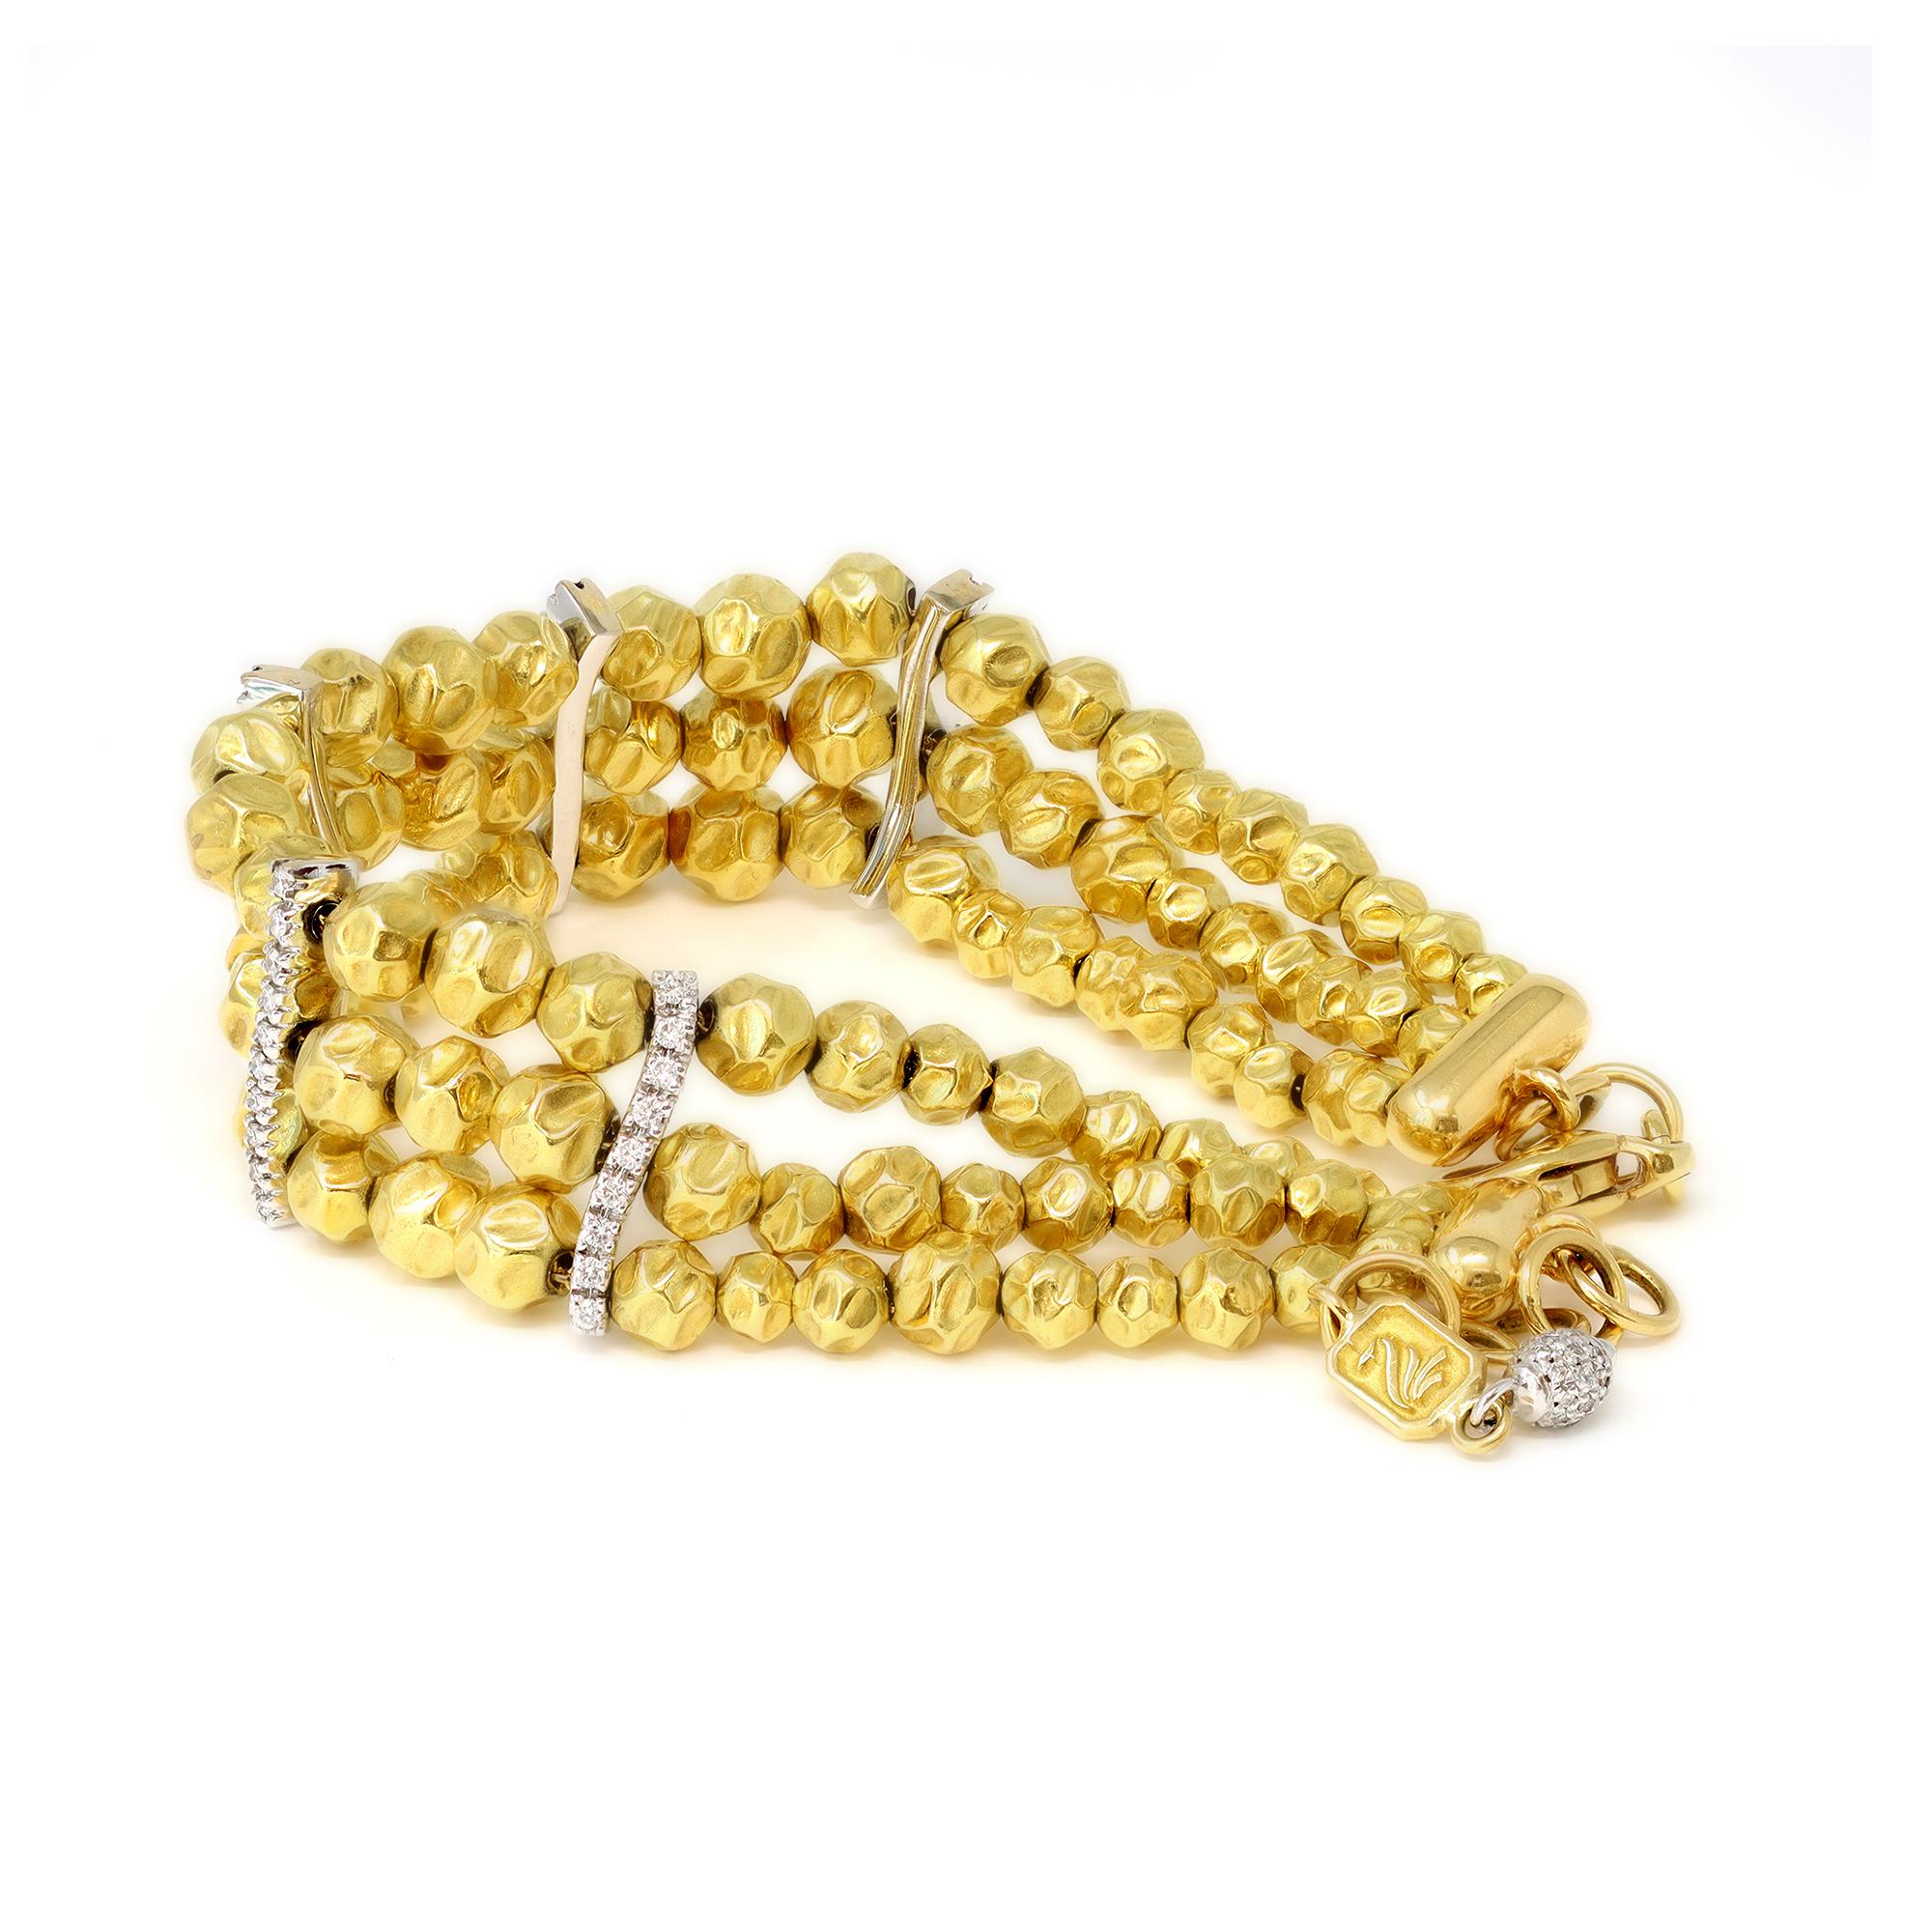 Contemporary An Italian Hammered Gold Beads Bracelet with diamonds 18k